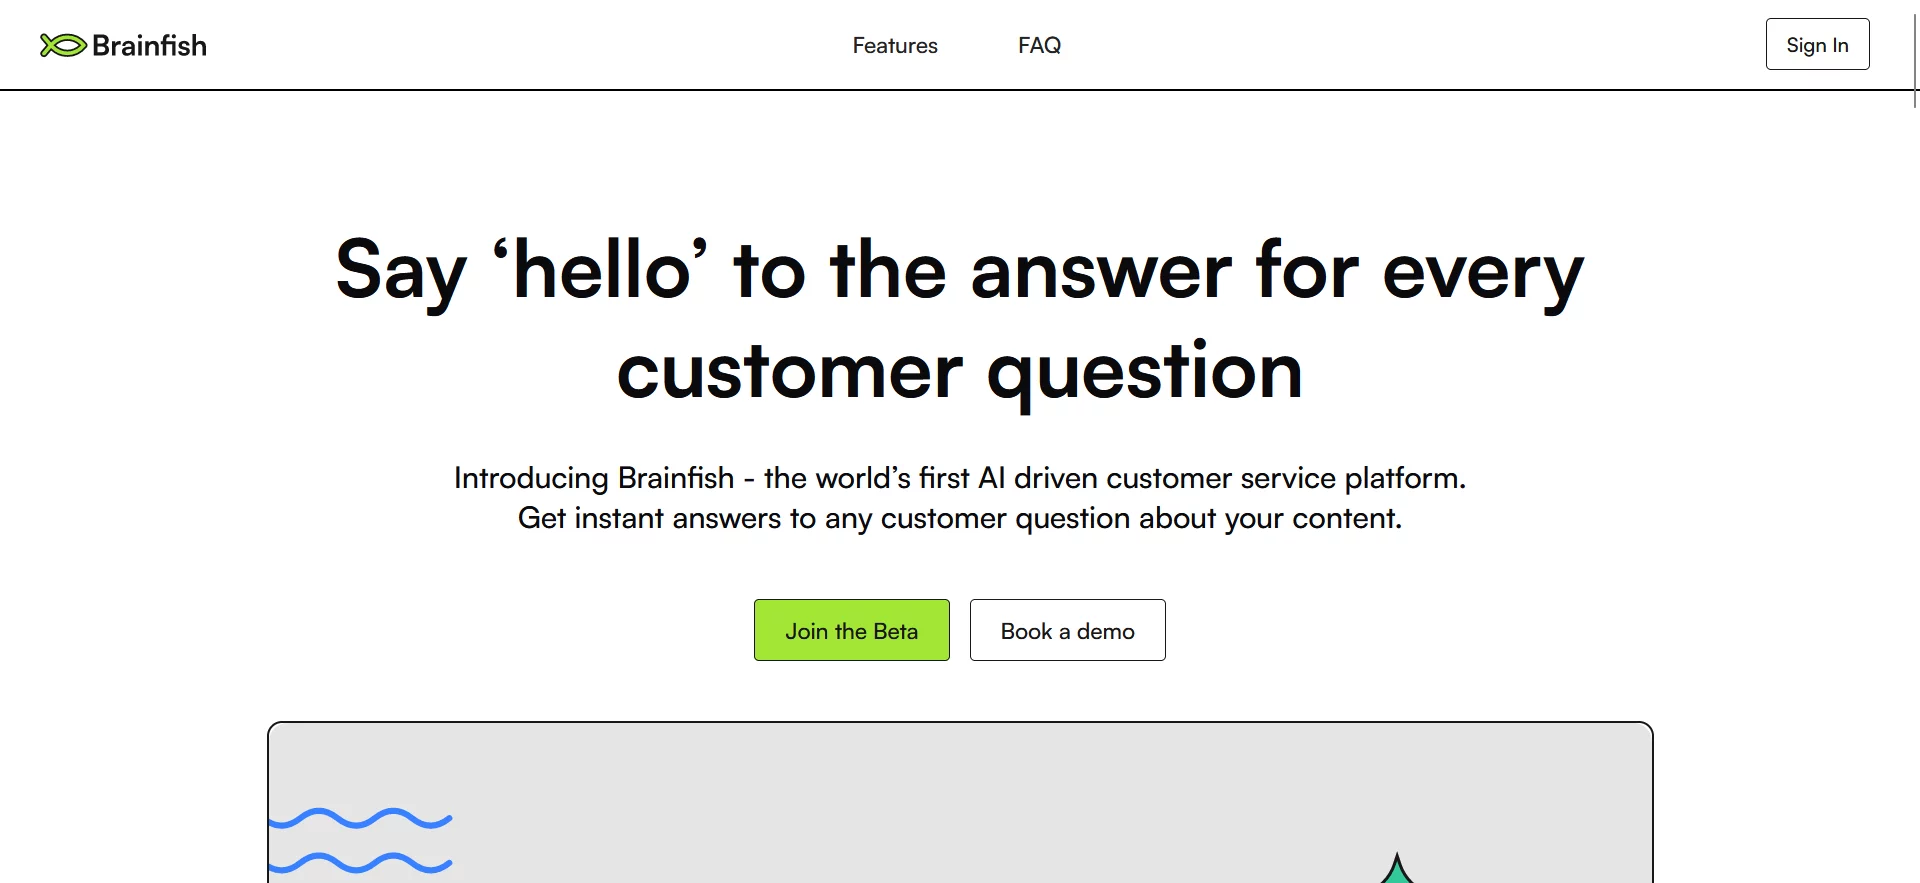  Answer customer questions instantly with AI